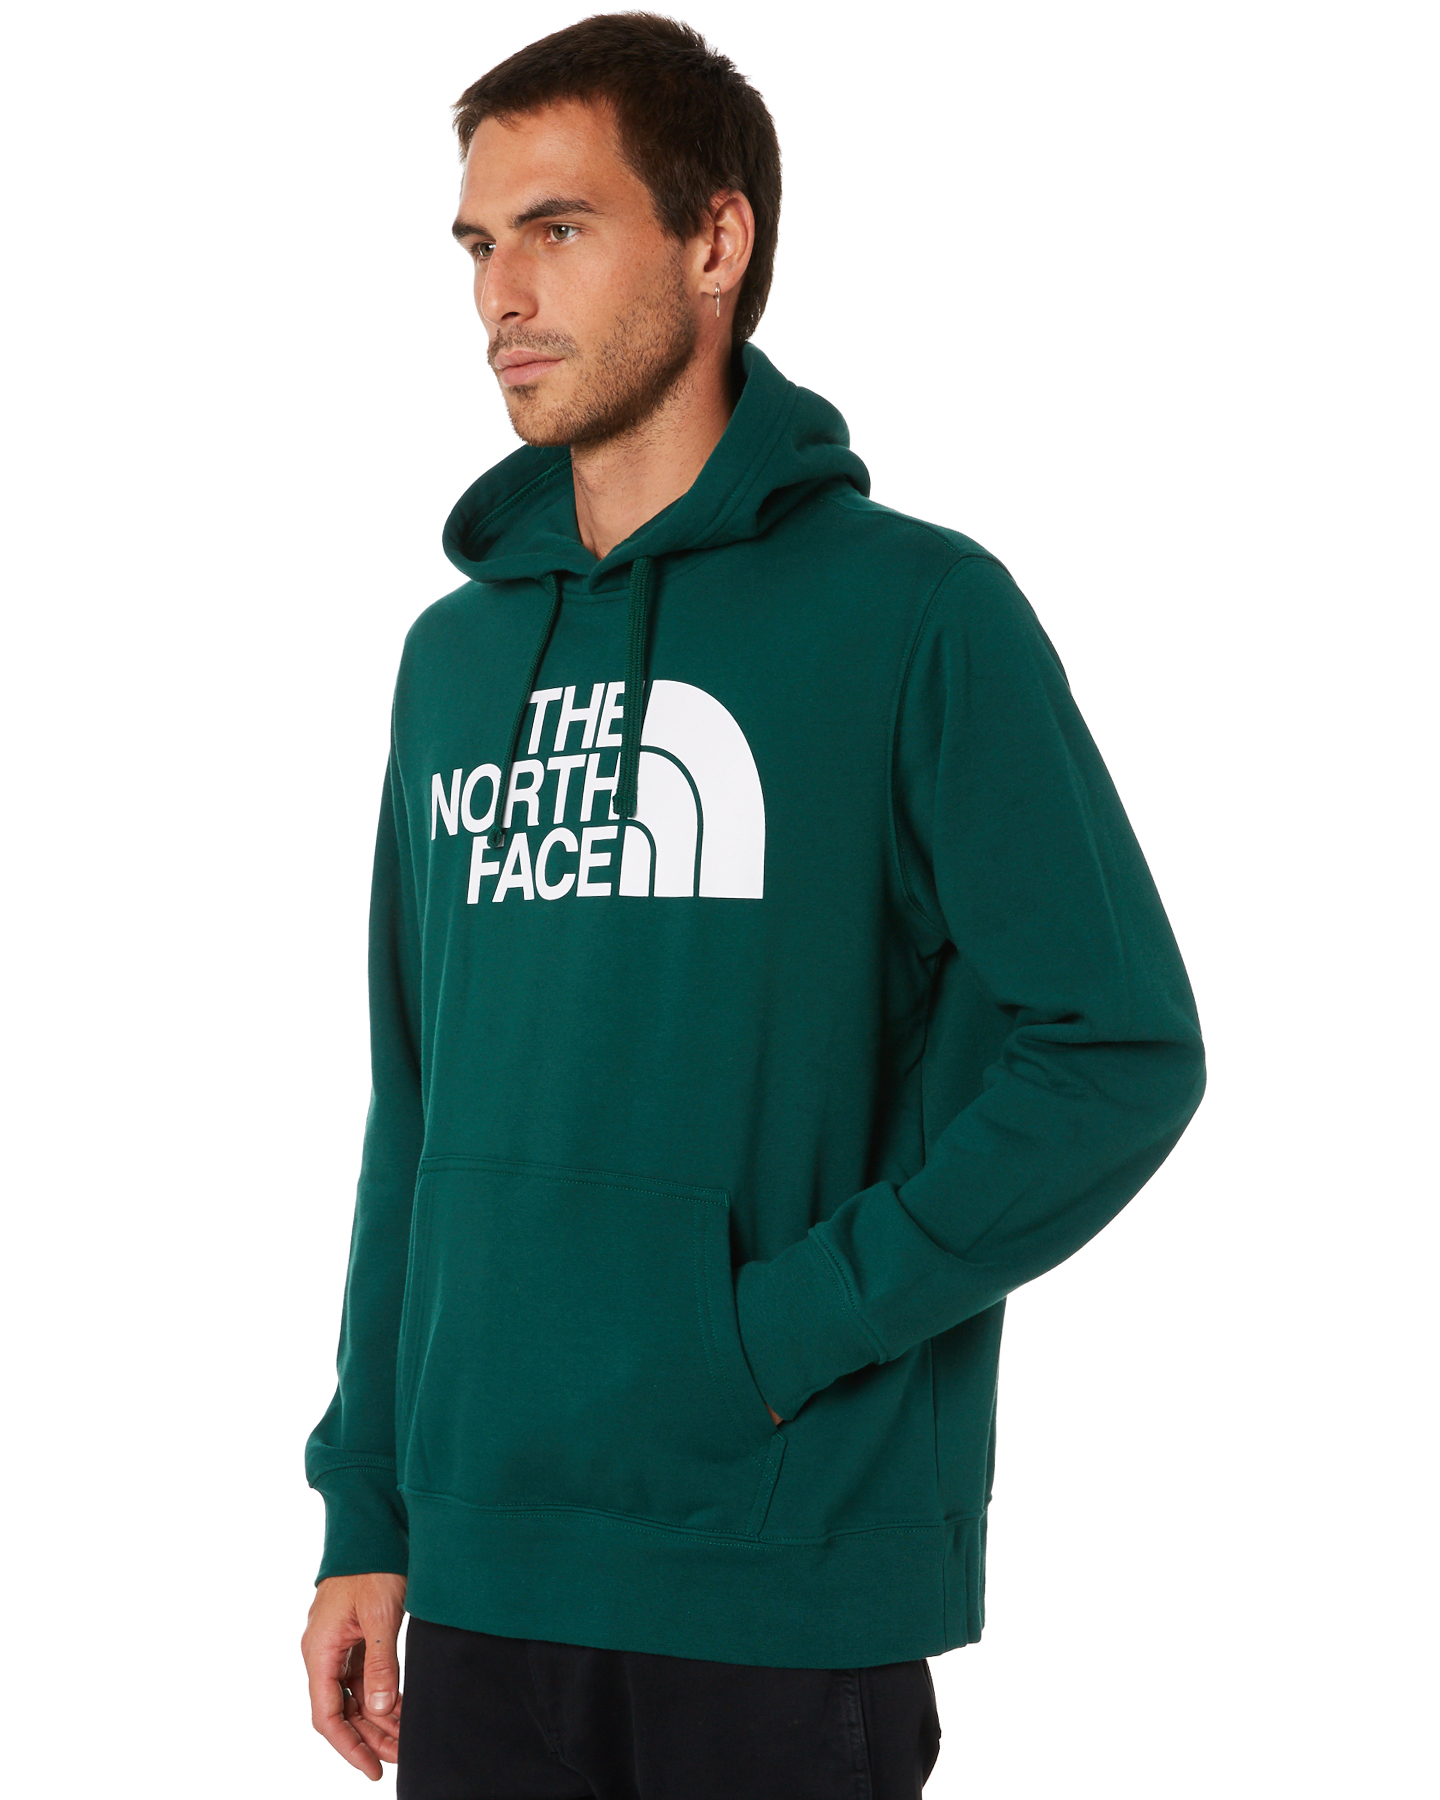 The North Face Half Dome Mens Hoodie - Night Green | SurfStitch